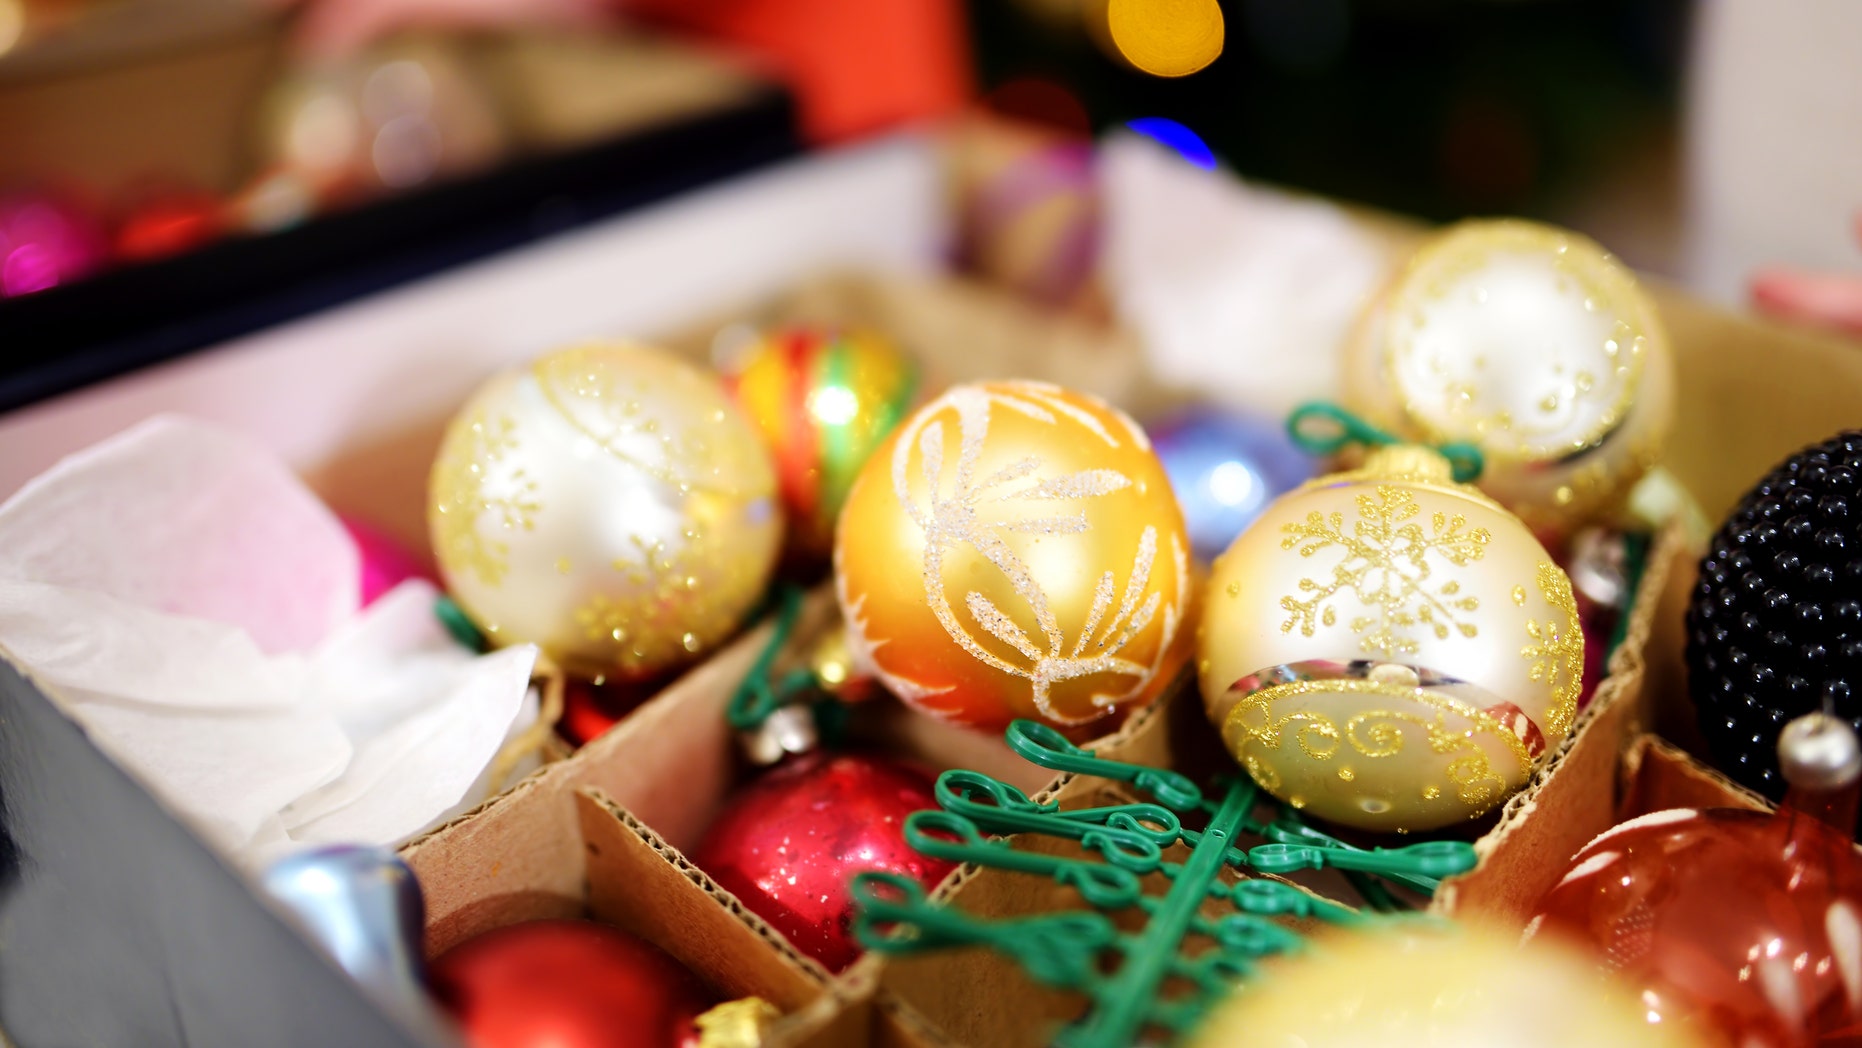 Taking down holiday decorations? Avoid these 7 mistakes everyone makes year after year